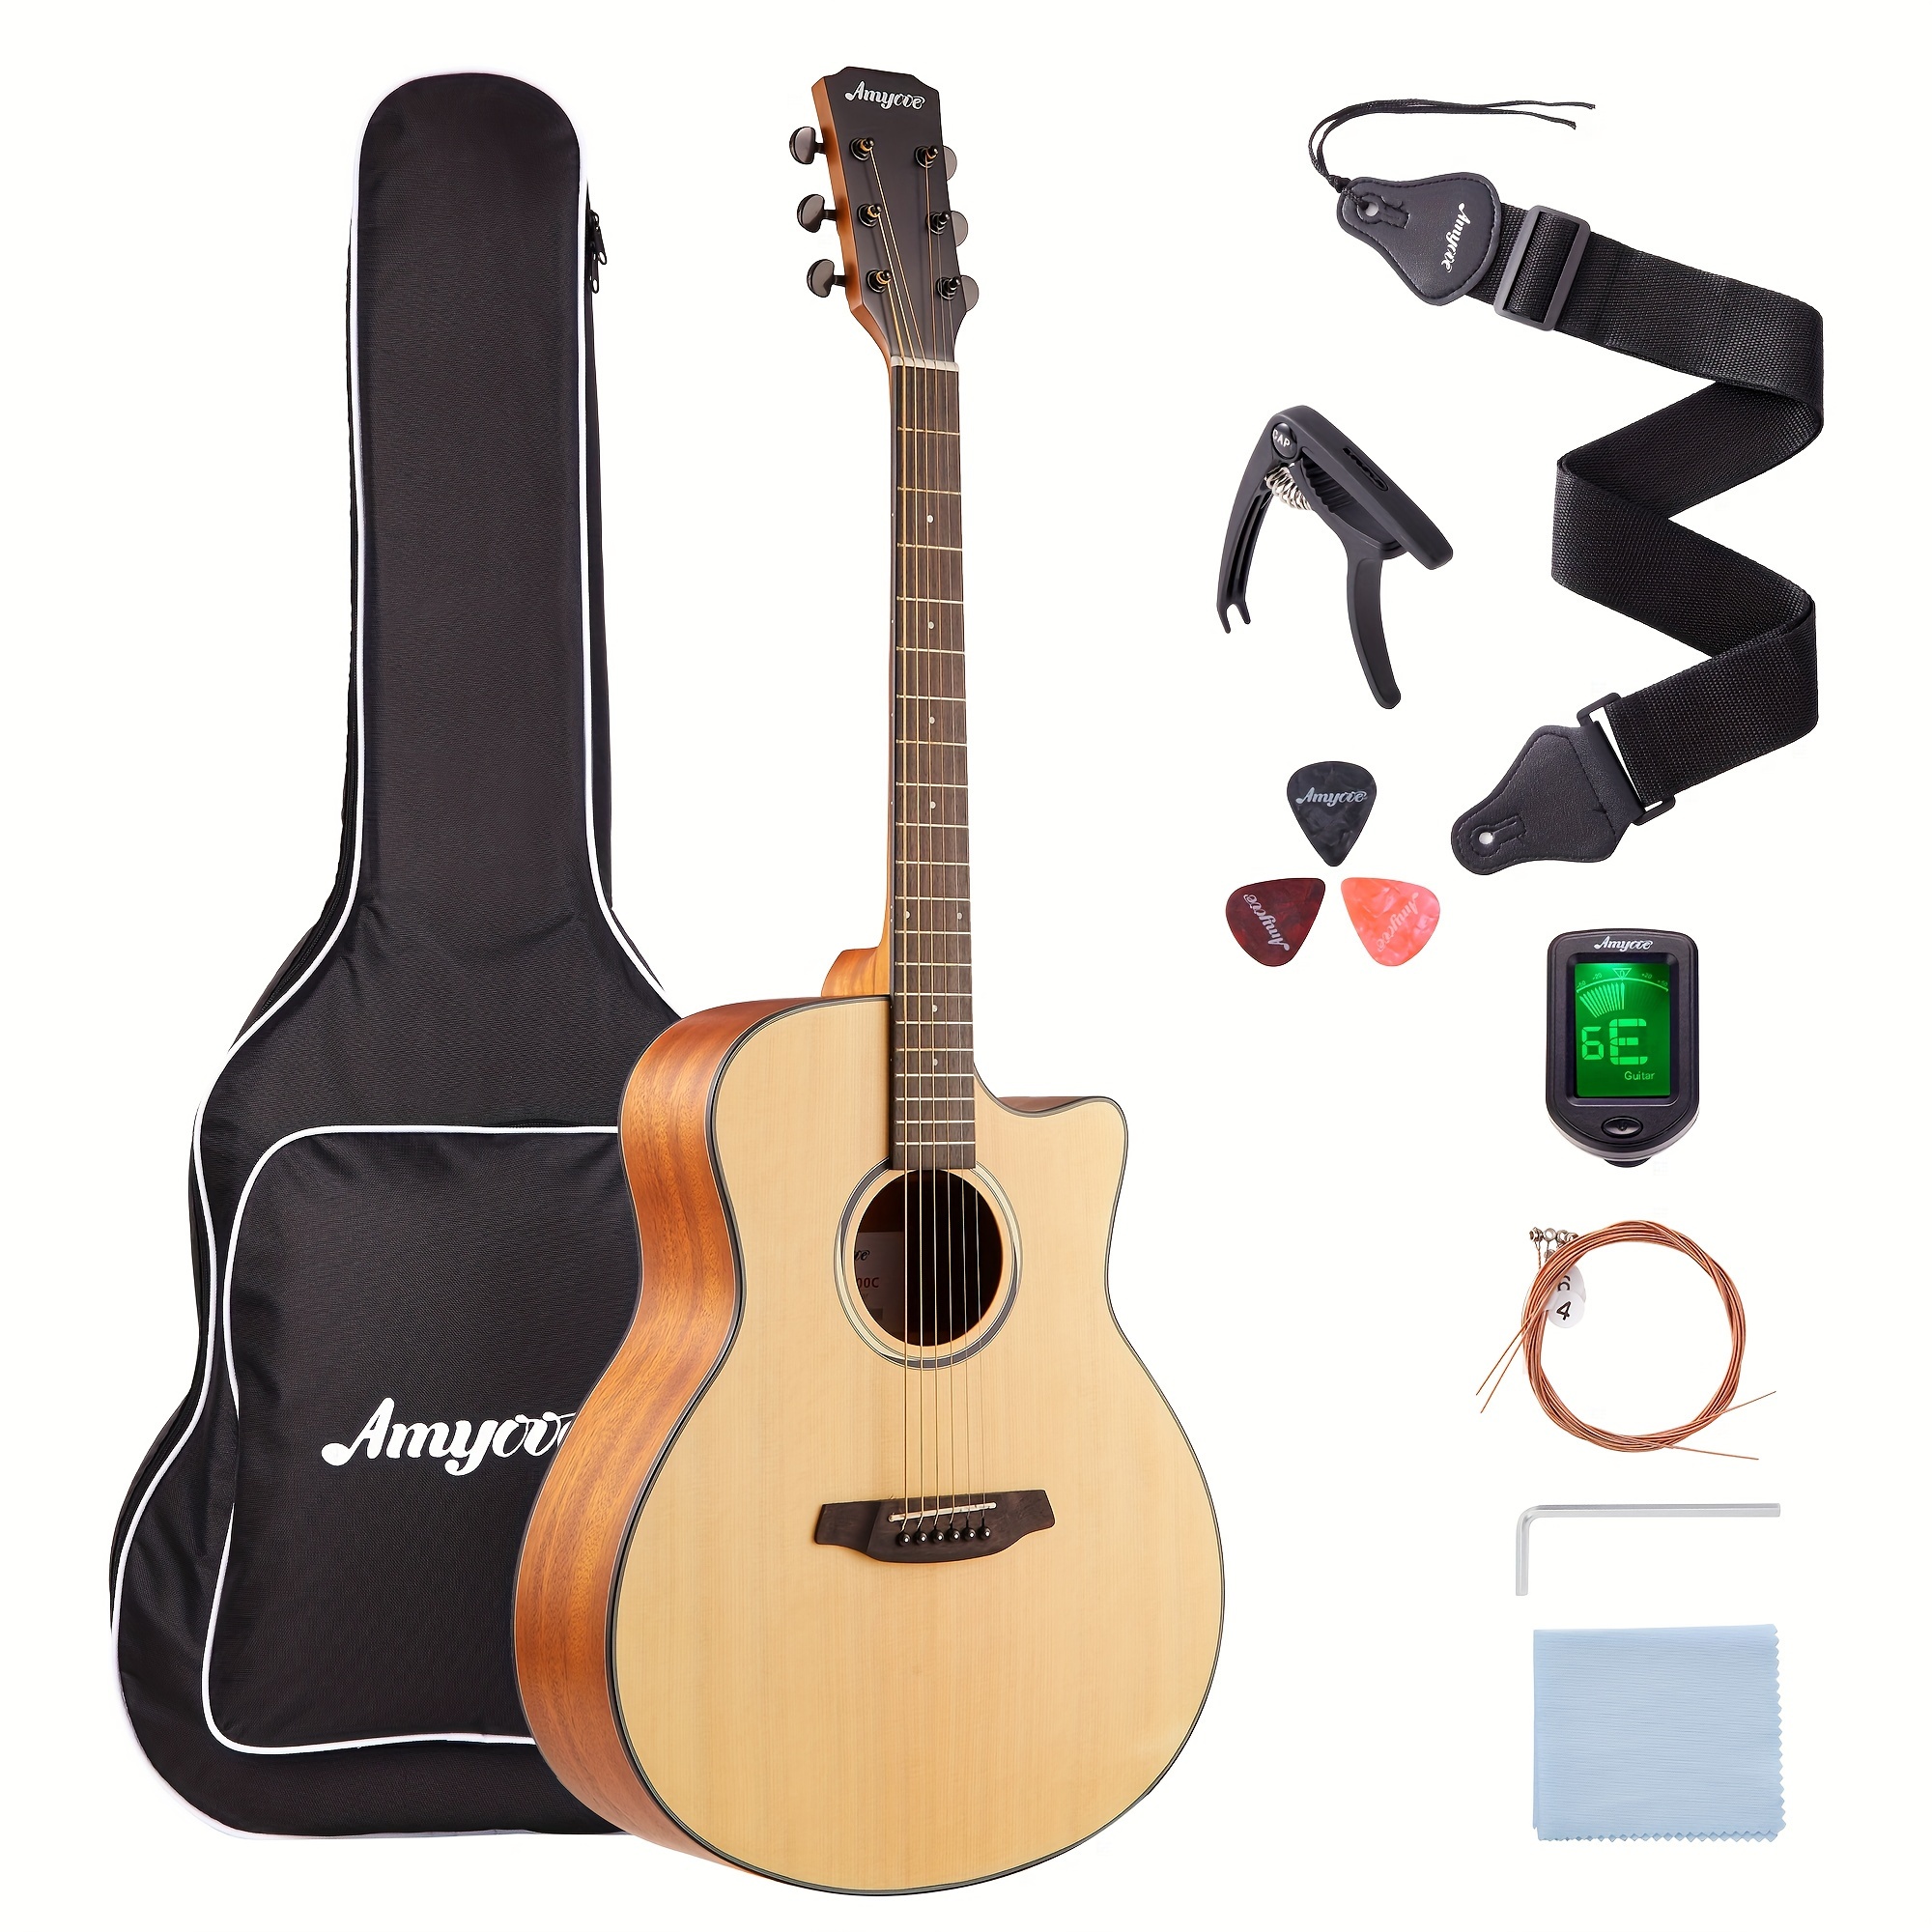 

Acoustic Guitar, 41"acoustic Guitar Kit Full Size Acustica Guitarra Bundle For Beginner Adult Teen With Gig Bag, Tuner, Strap, Strings, Picks, Capos, Right Hand